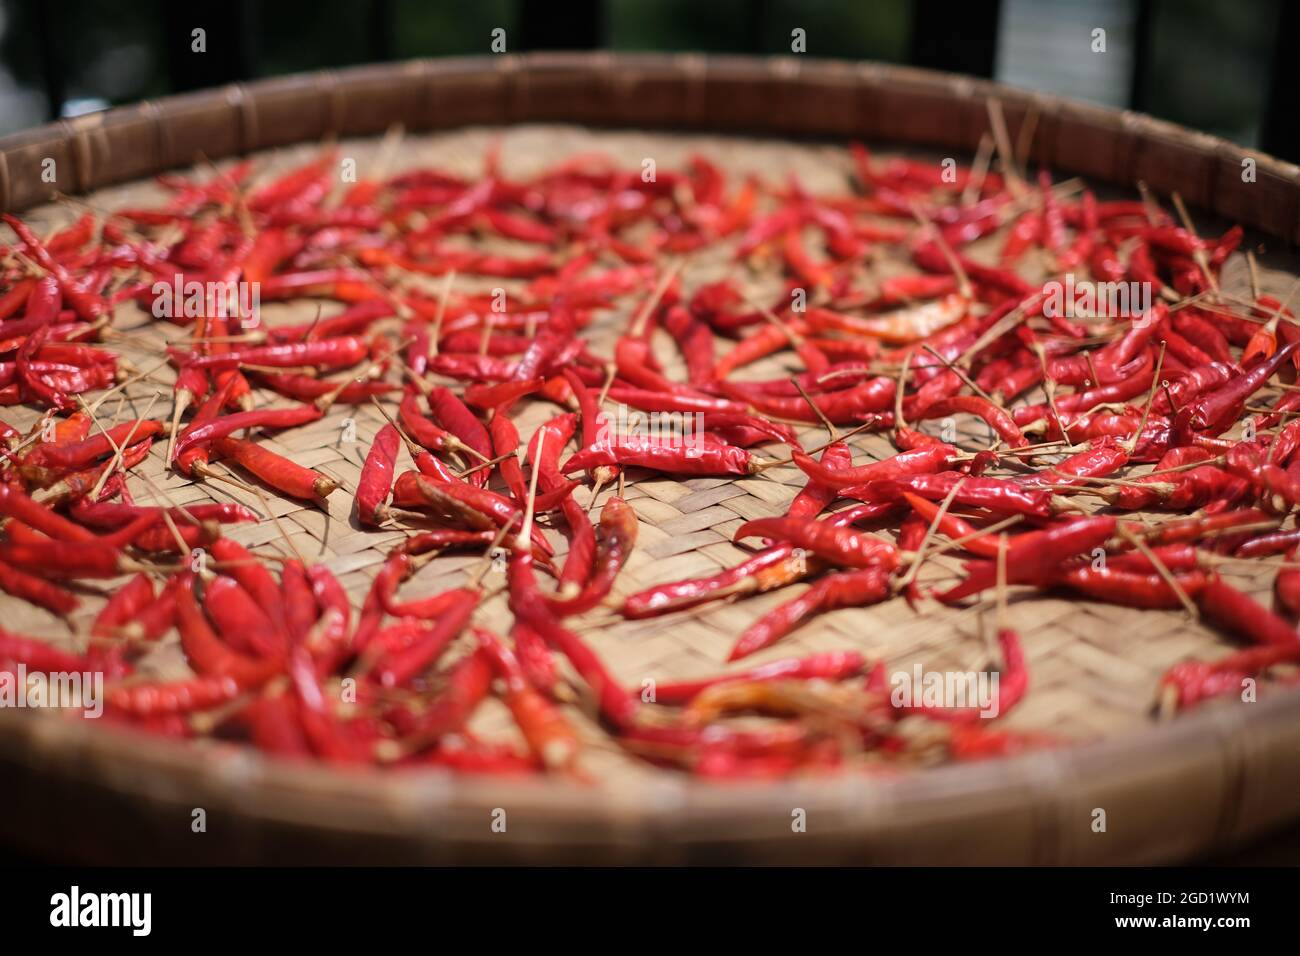 Red hot chili pepper on a big platter, drying under direct sunlight Stock Photo